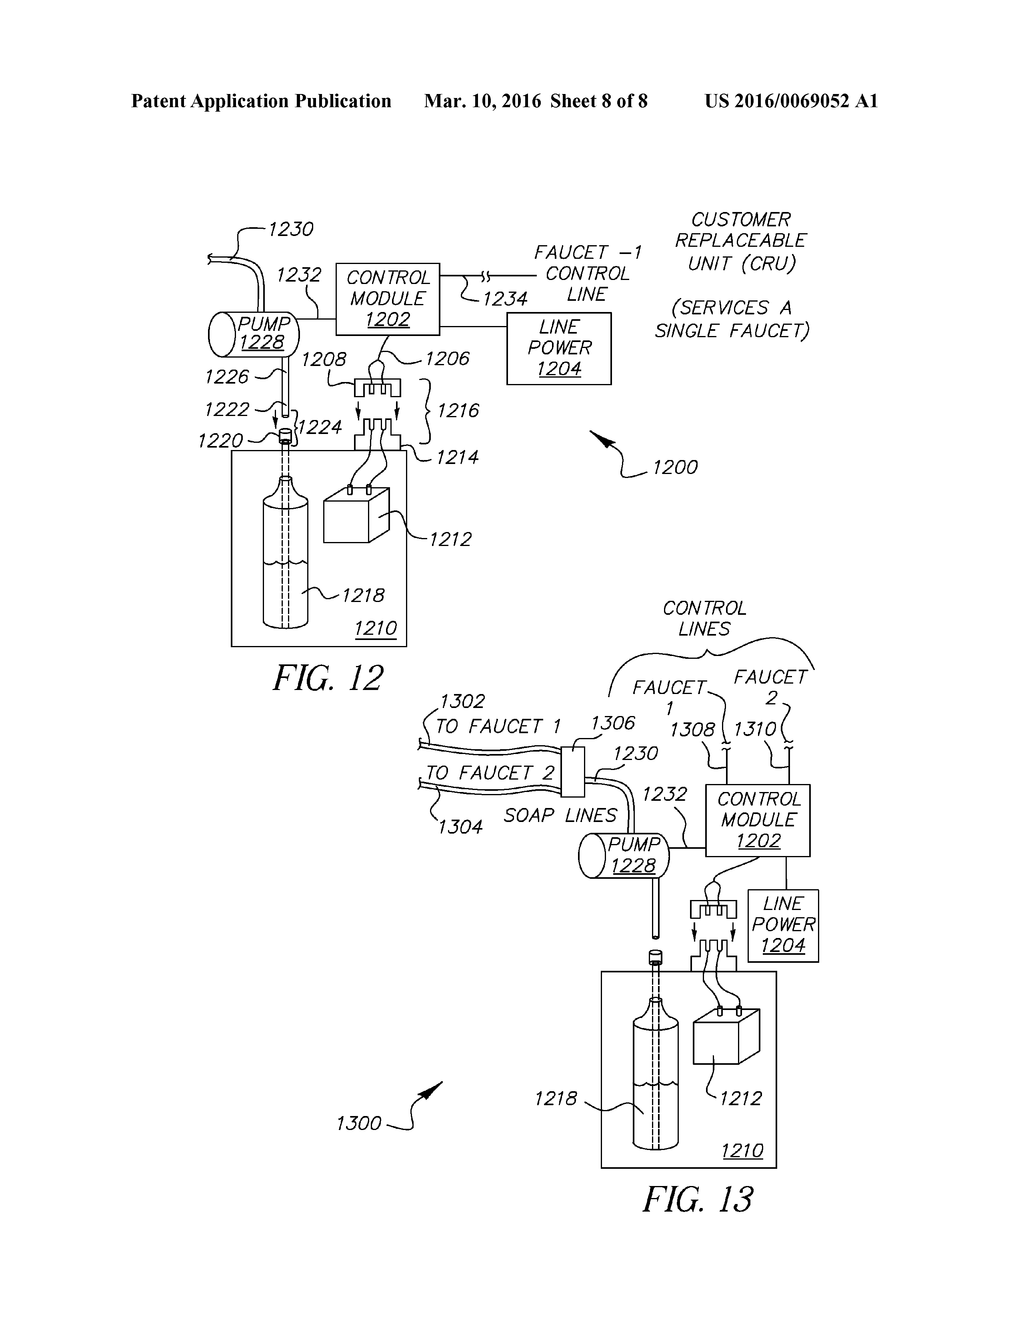 Faucet System Comprising a Liquid Soap Delivery Line - diagram, schematic, and image 09